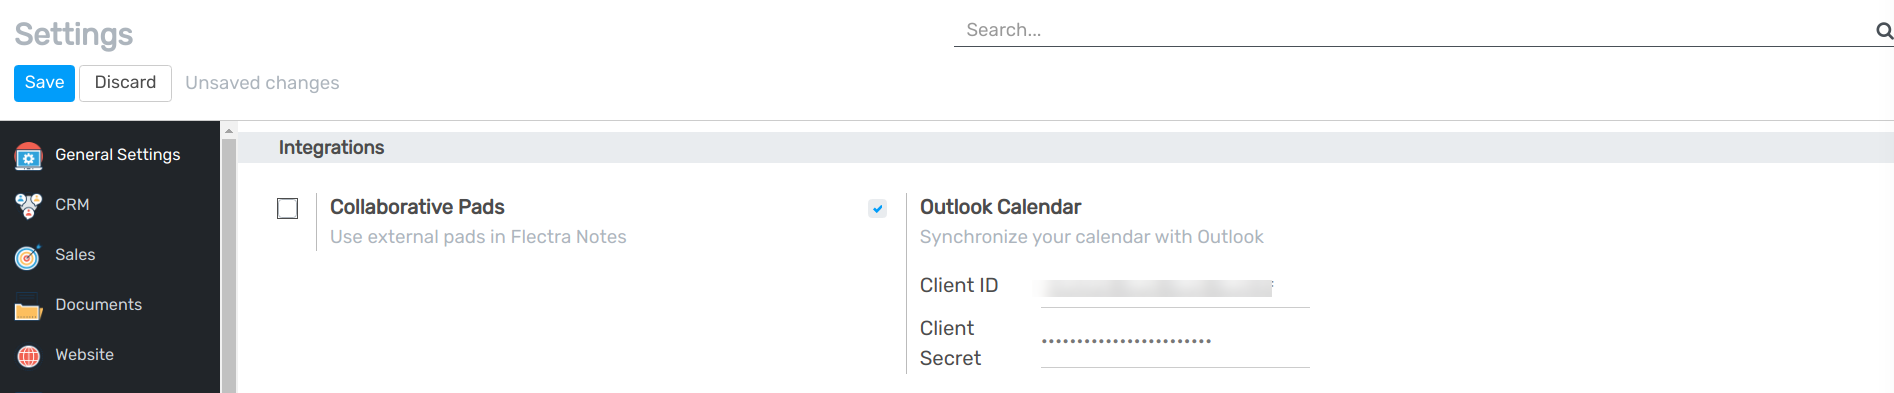 Outlook Calendar feature activated in Flectra